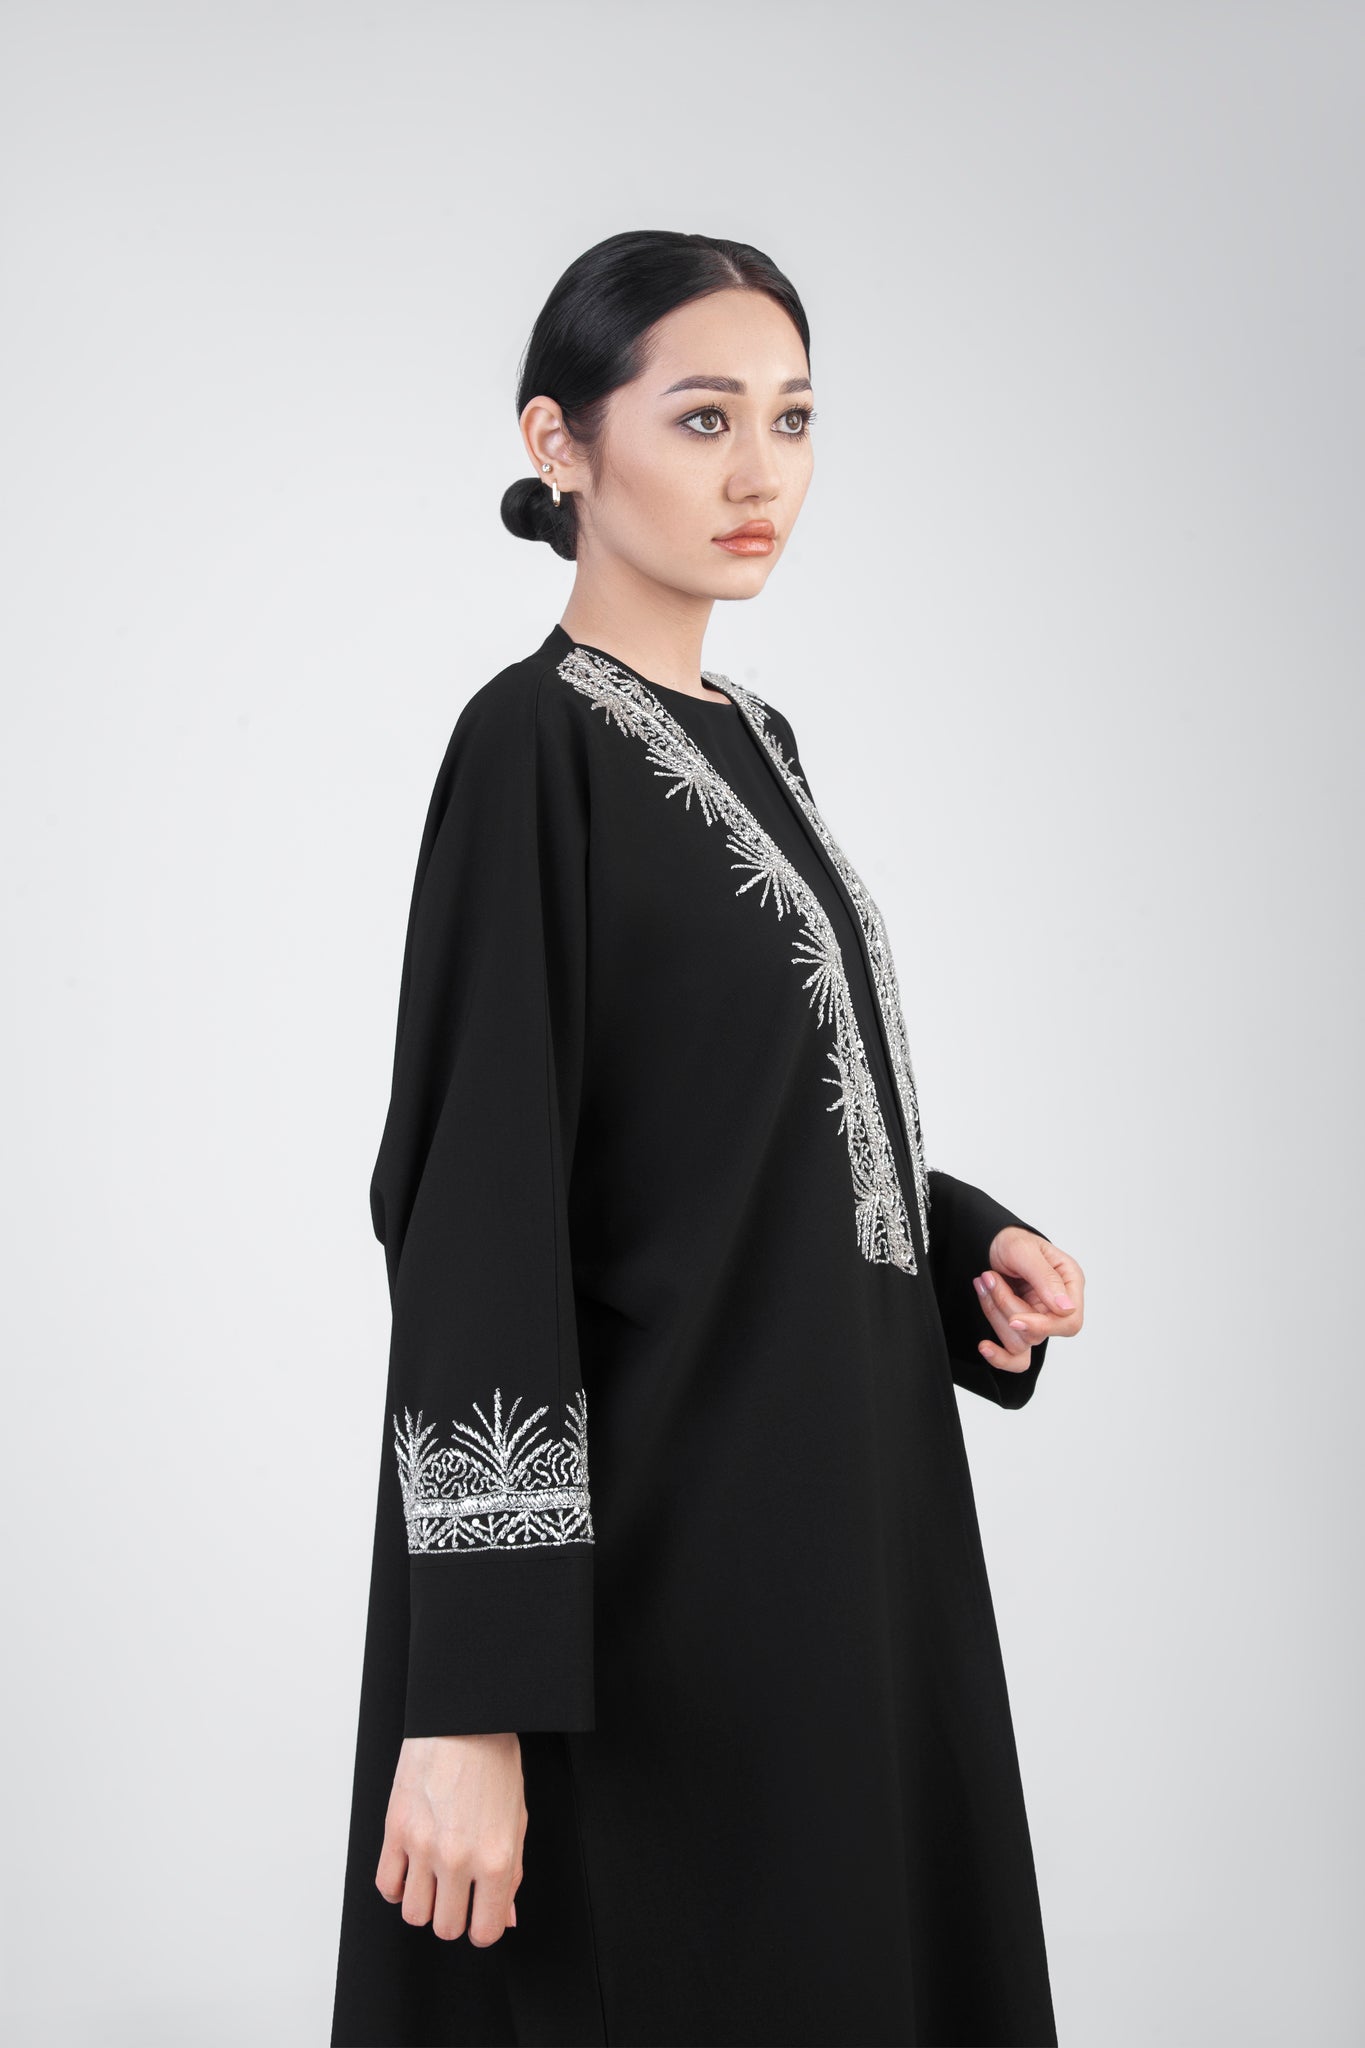 Embroidered Open Abaya Design On Sleeves And Front